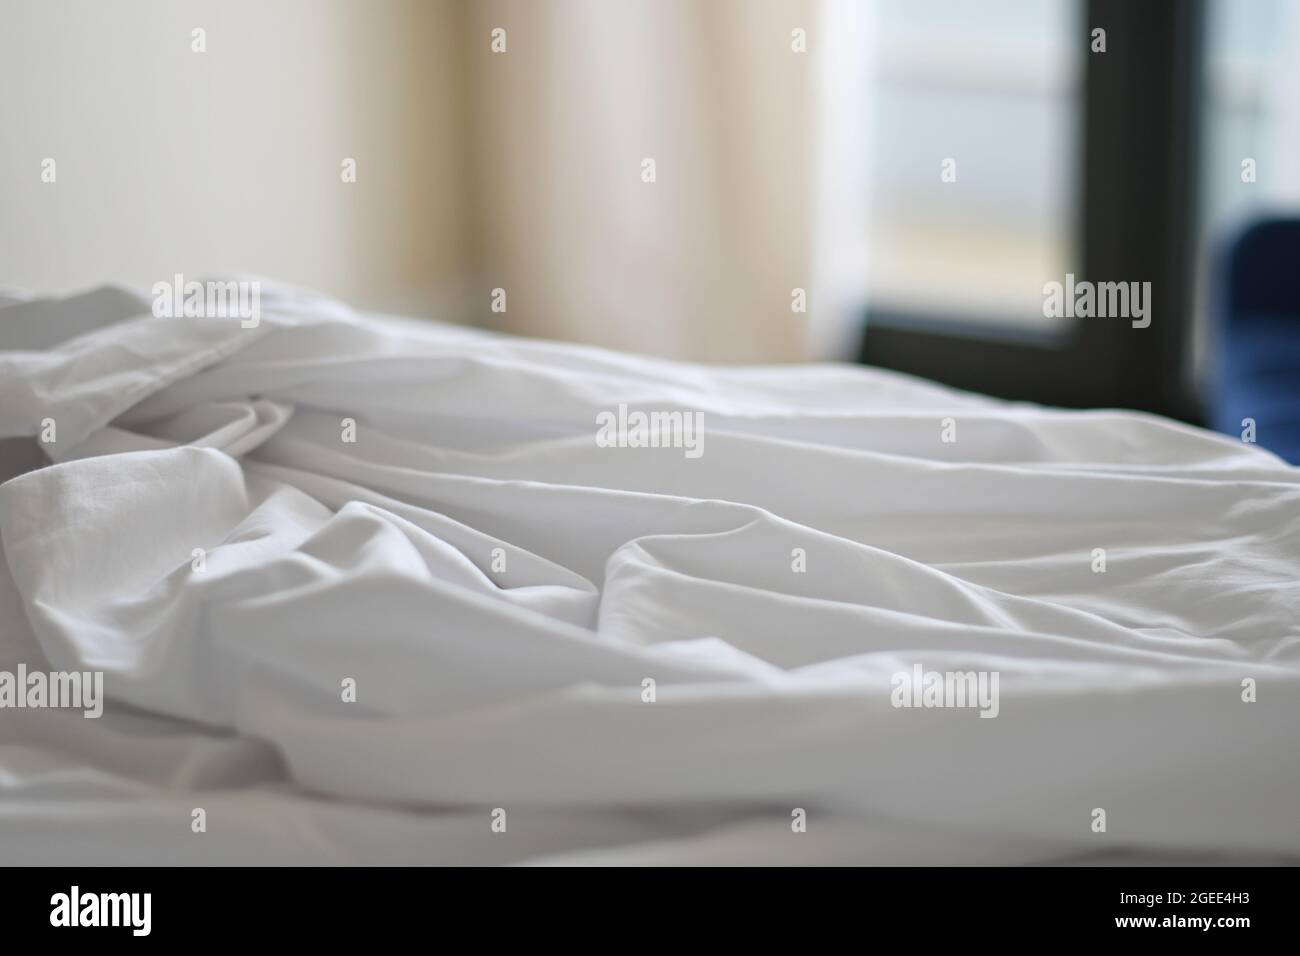 Unmade bed with crumpled bed sheet. Shallow depth of field Stock Photo